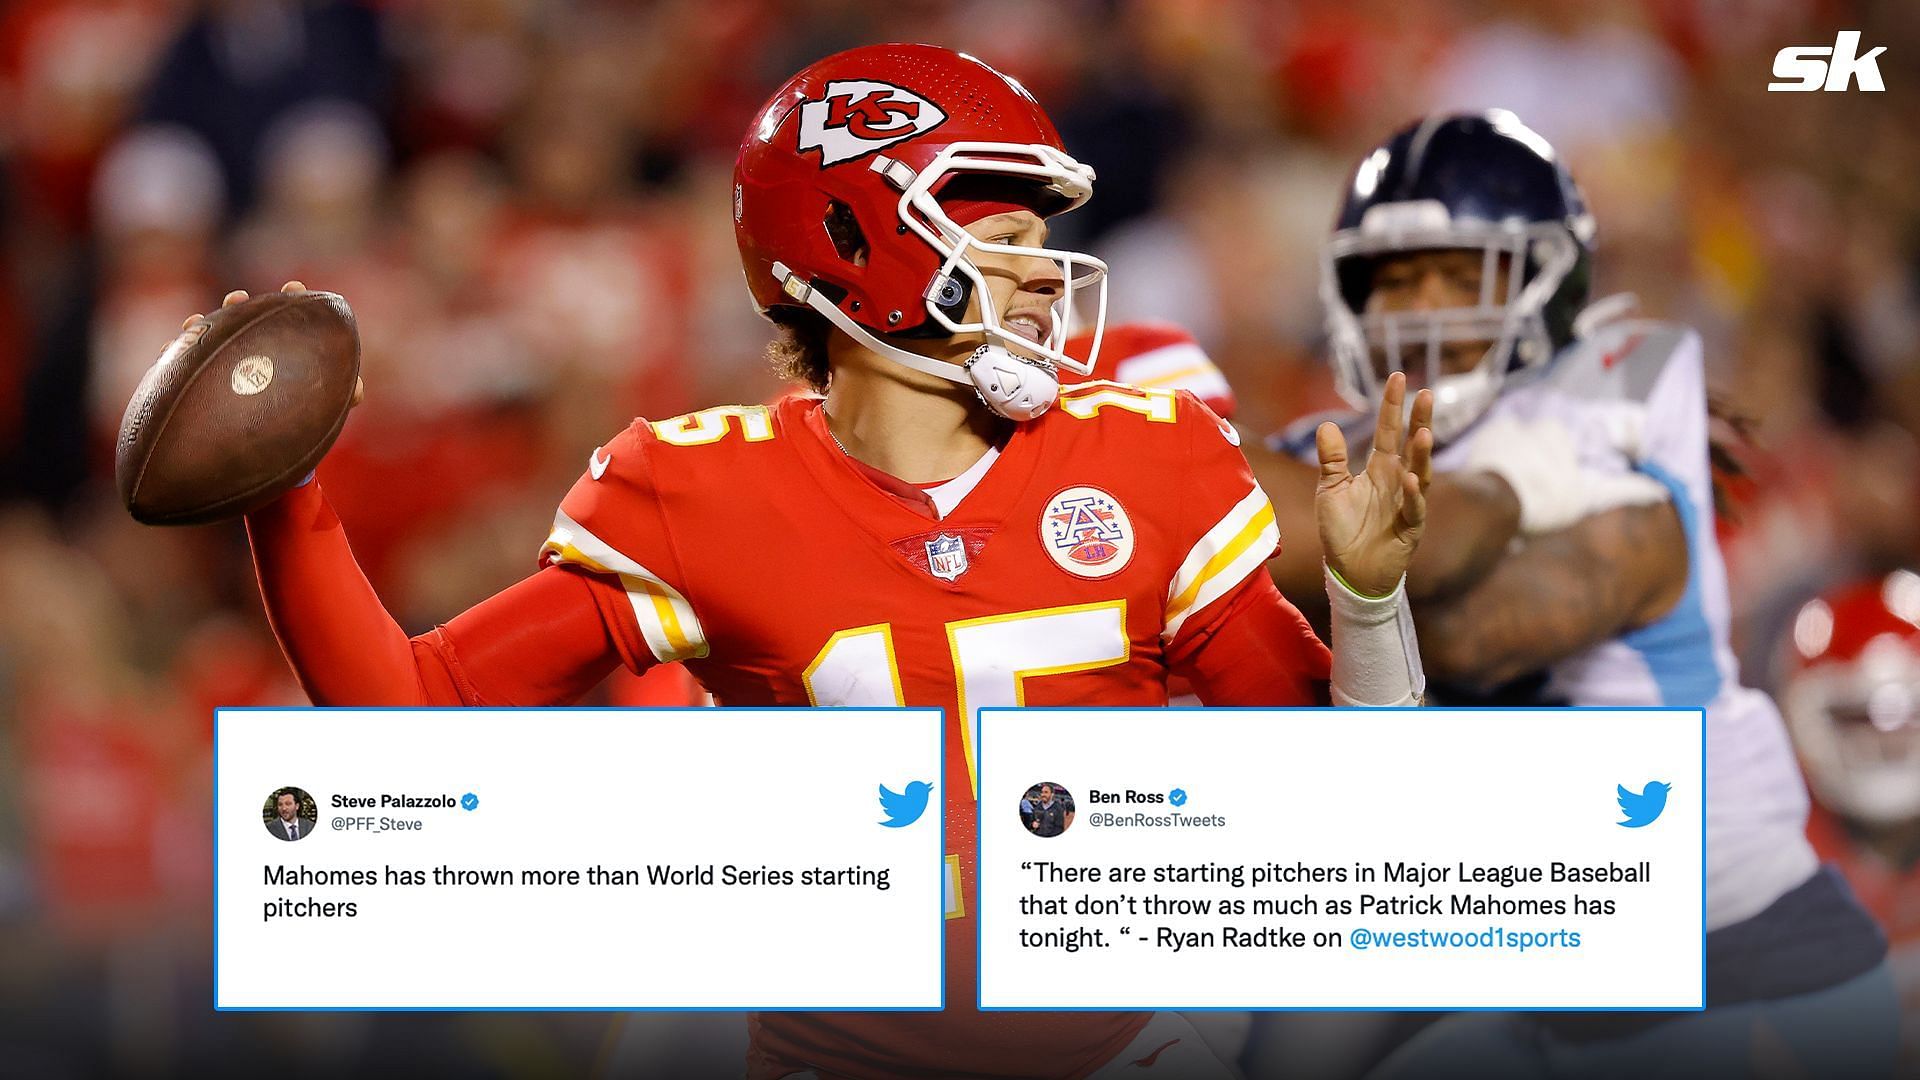 Mahomes has thrown more than World Series pitchers - NFL world in awe of Patrick  Mahomes' ridiculous display in OT win vs Titans